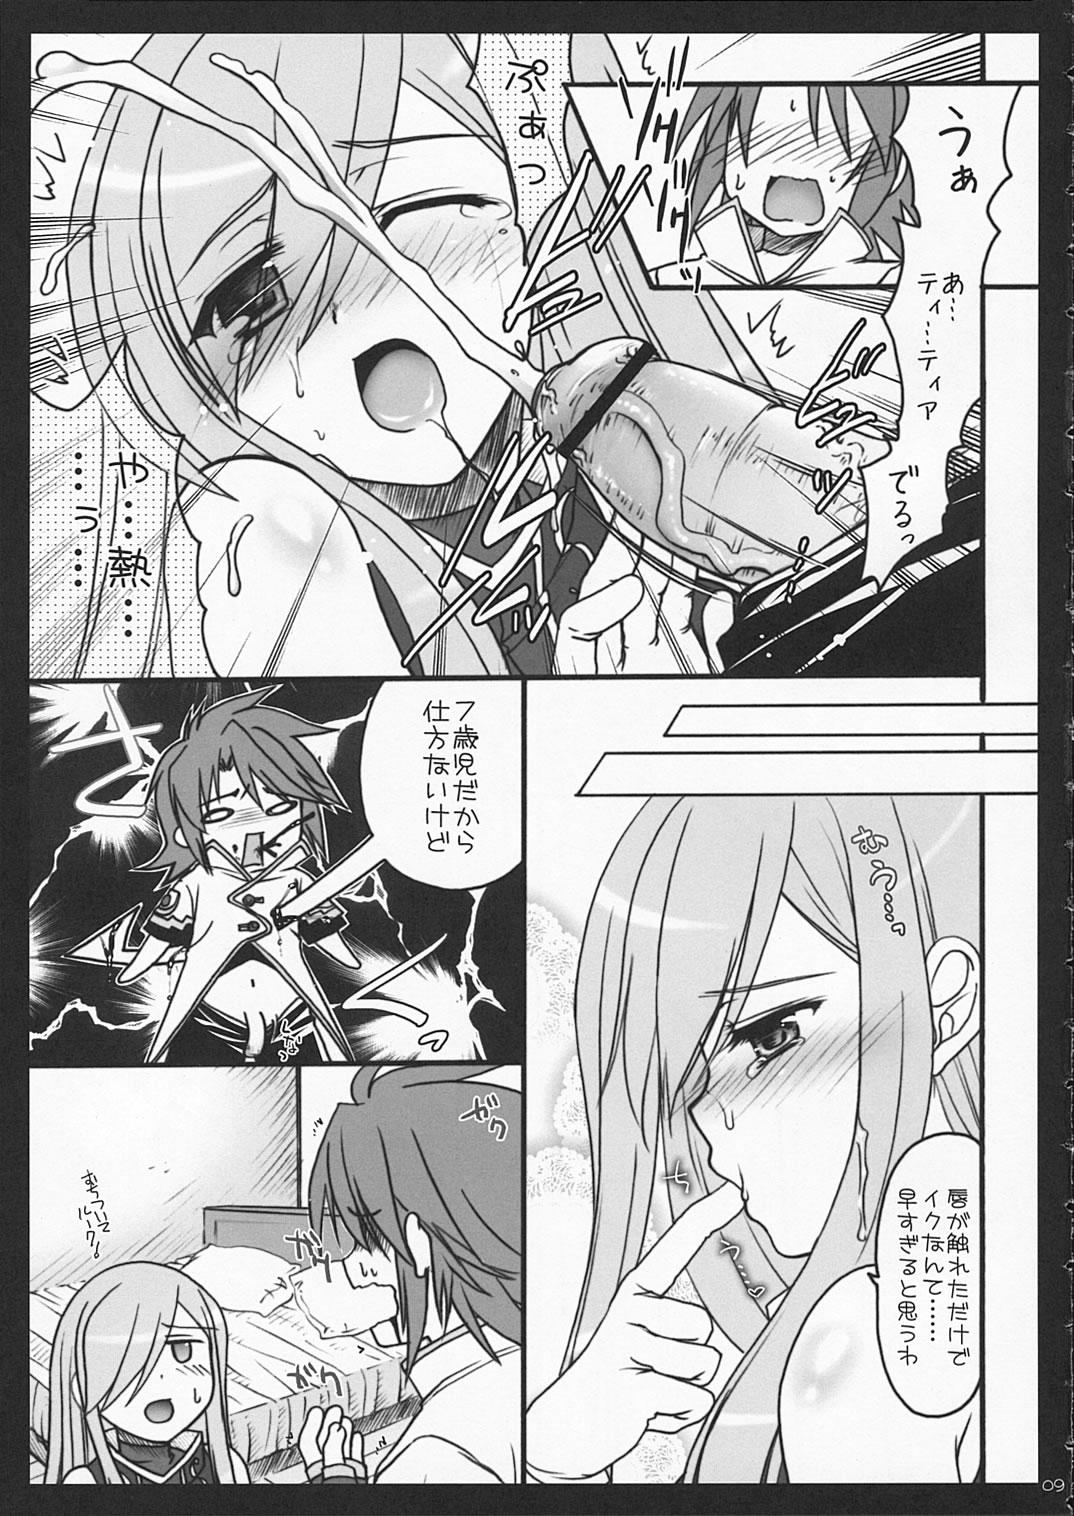 Lick DEKAMELON - Tales of the abyss Negra - Page 8